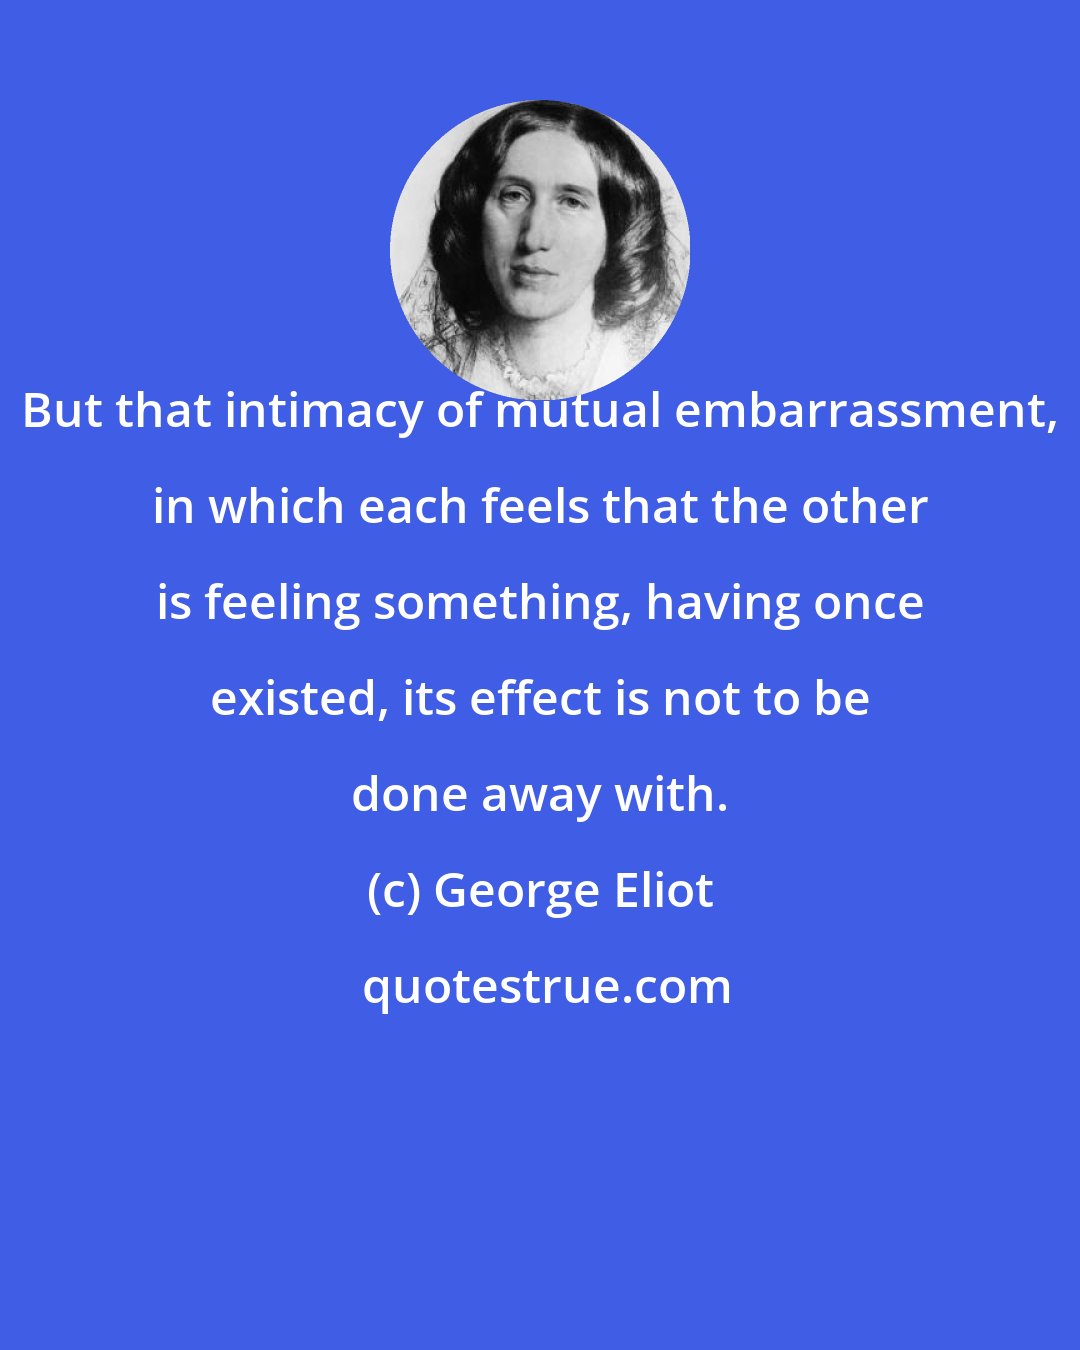 George Eliot: But that intimacy of mutual embarrassment, in which each feels that the other is feeling something, having once existed, its effect is not to be done away with.